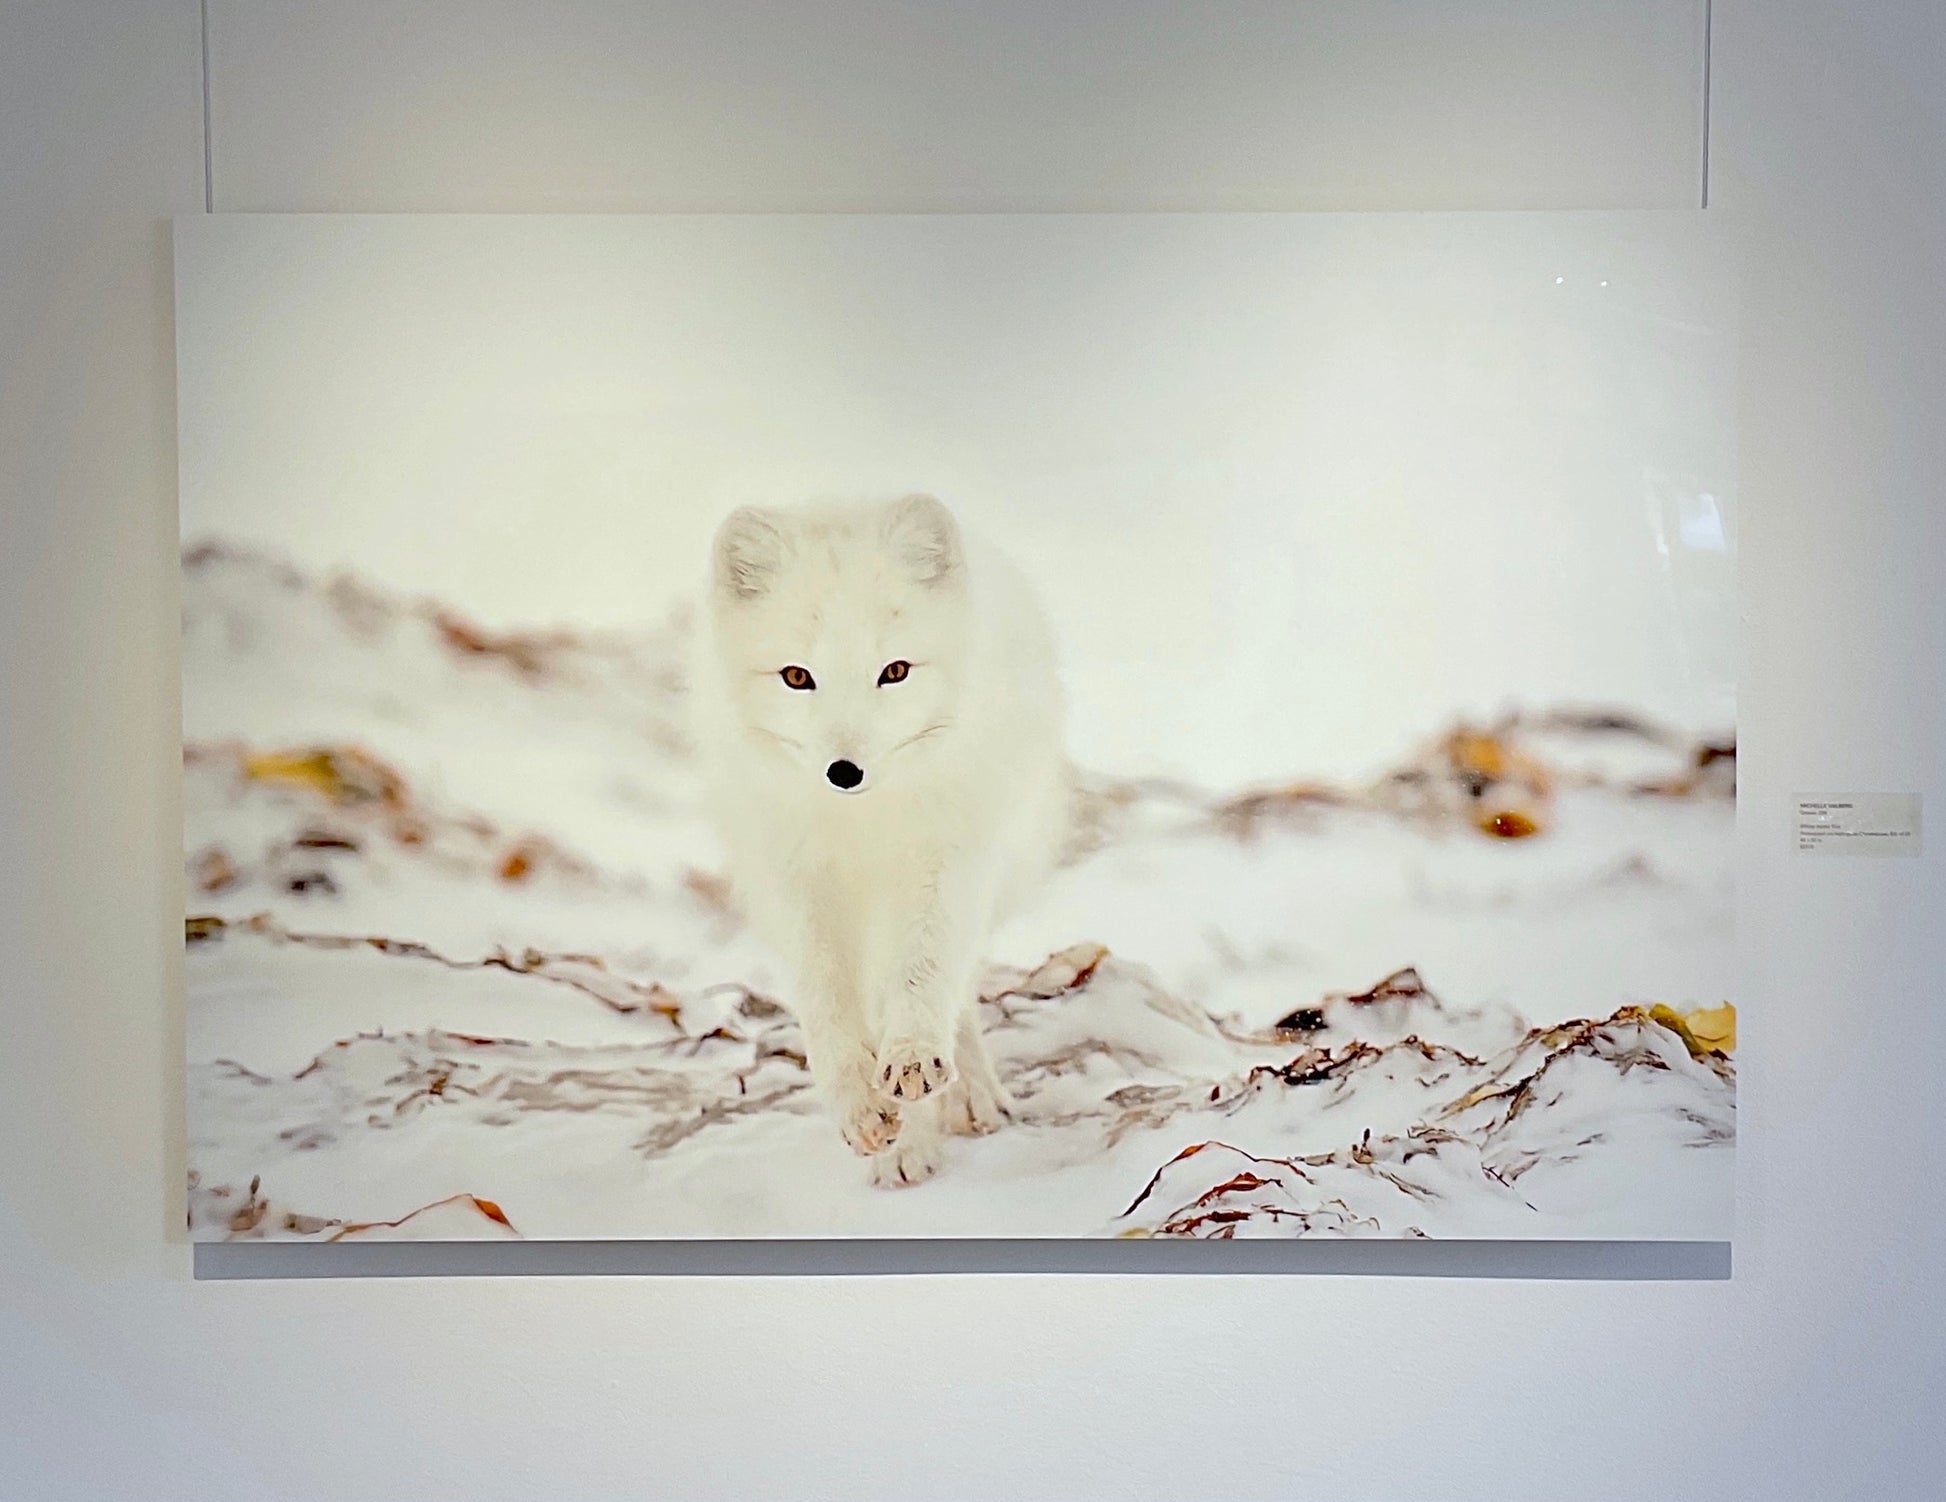 White Arctic Fox by Michelle Valberg, printed on Chromaluxe